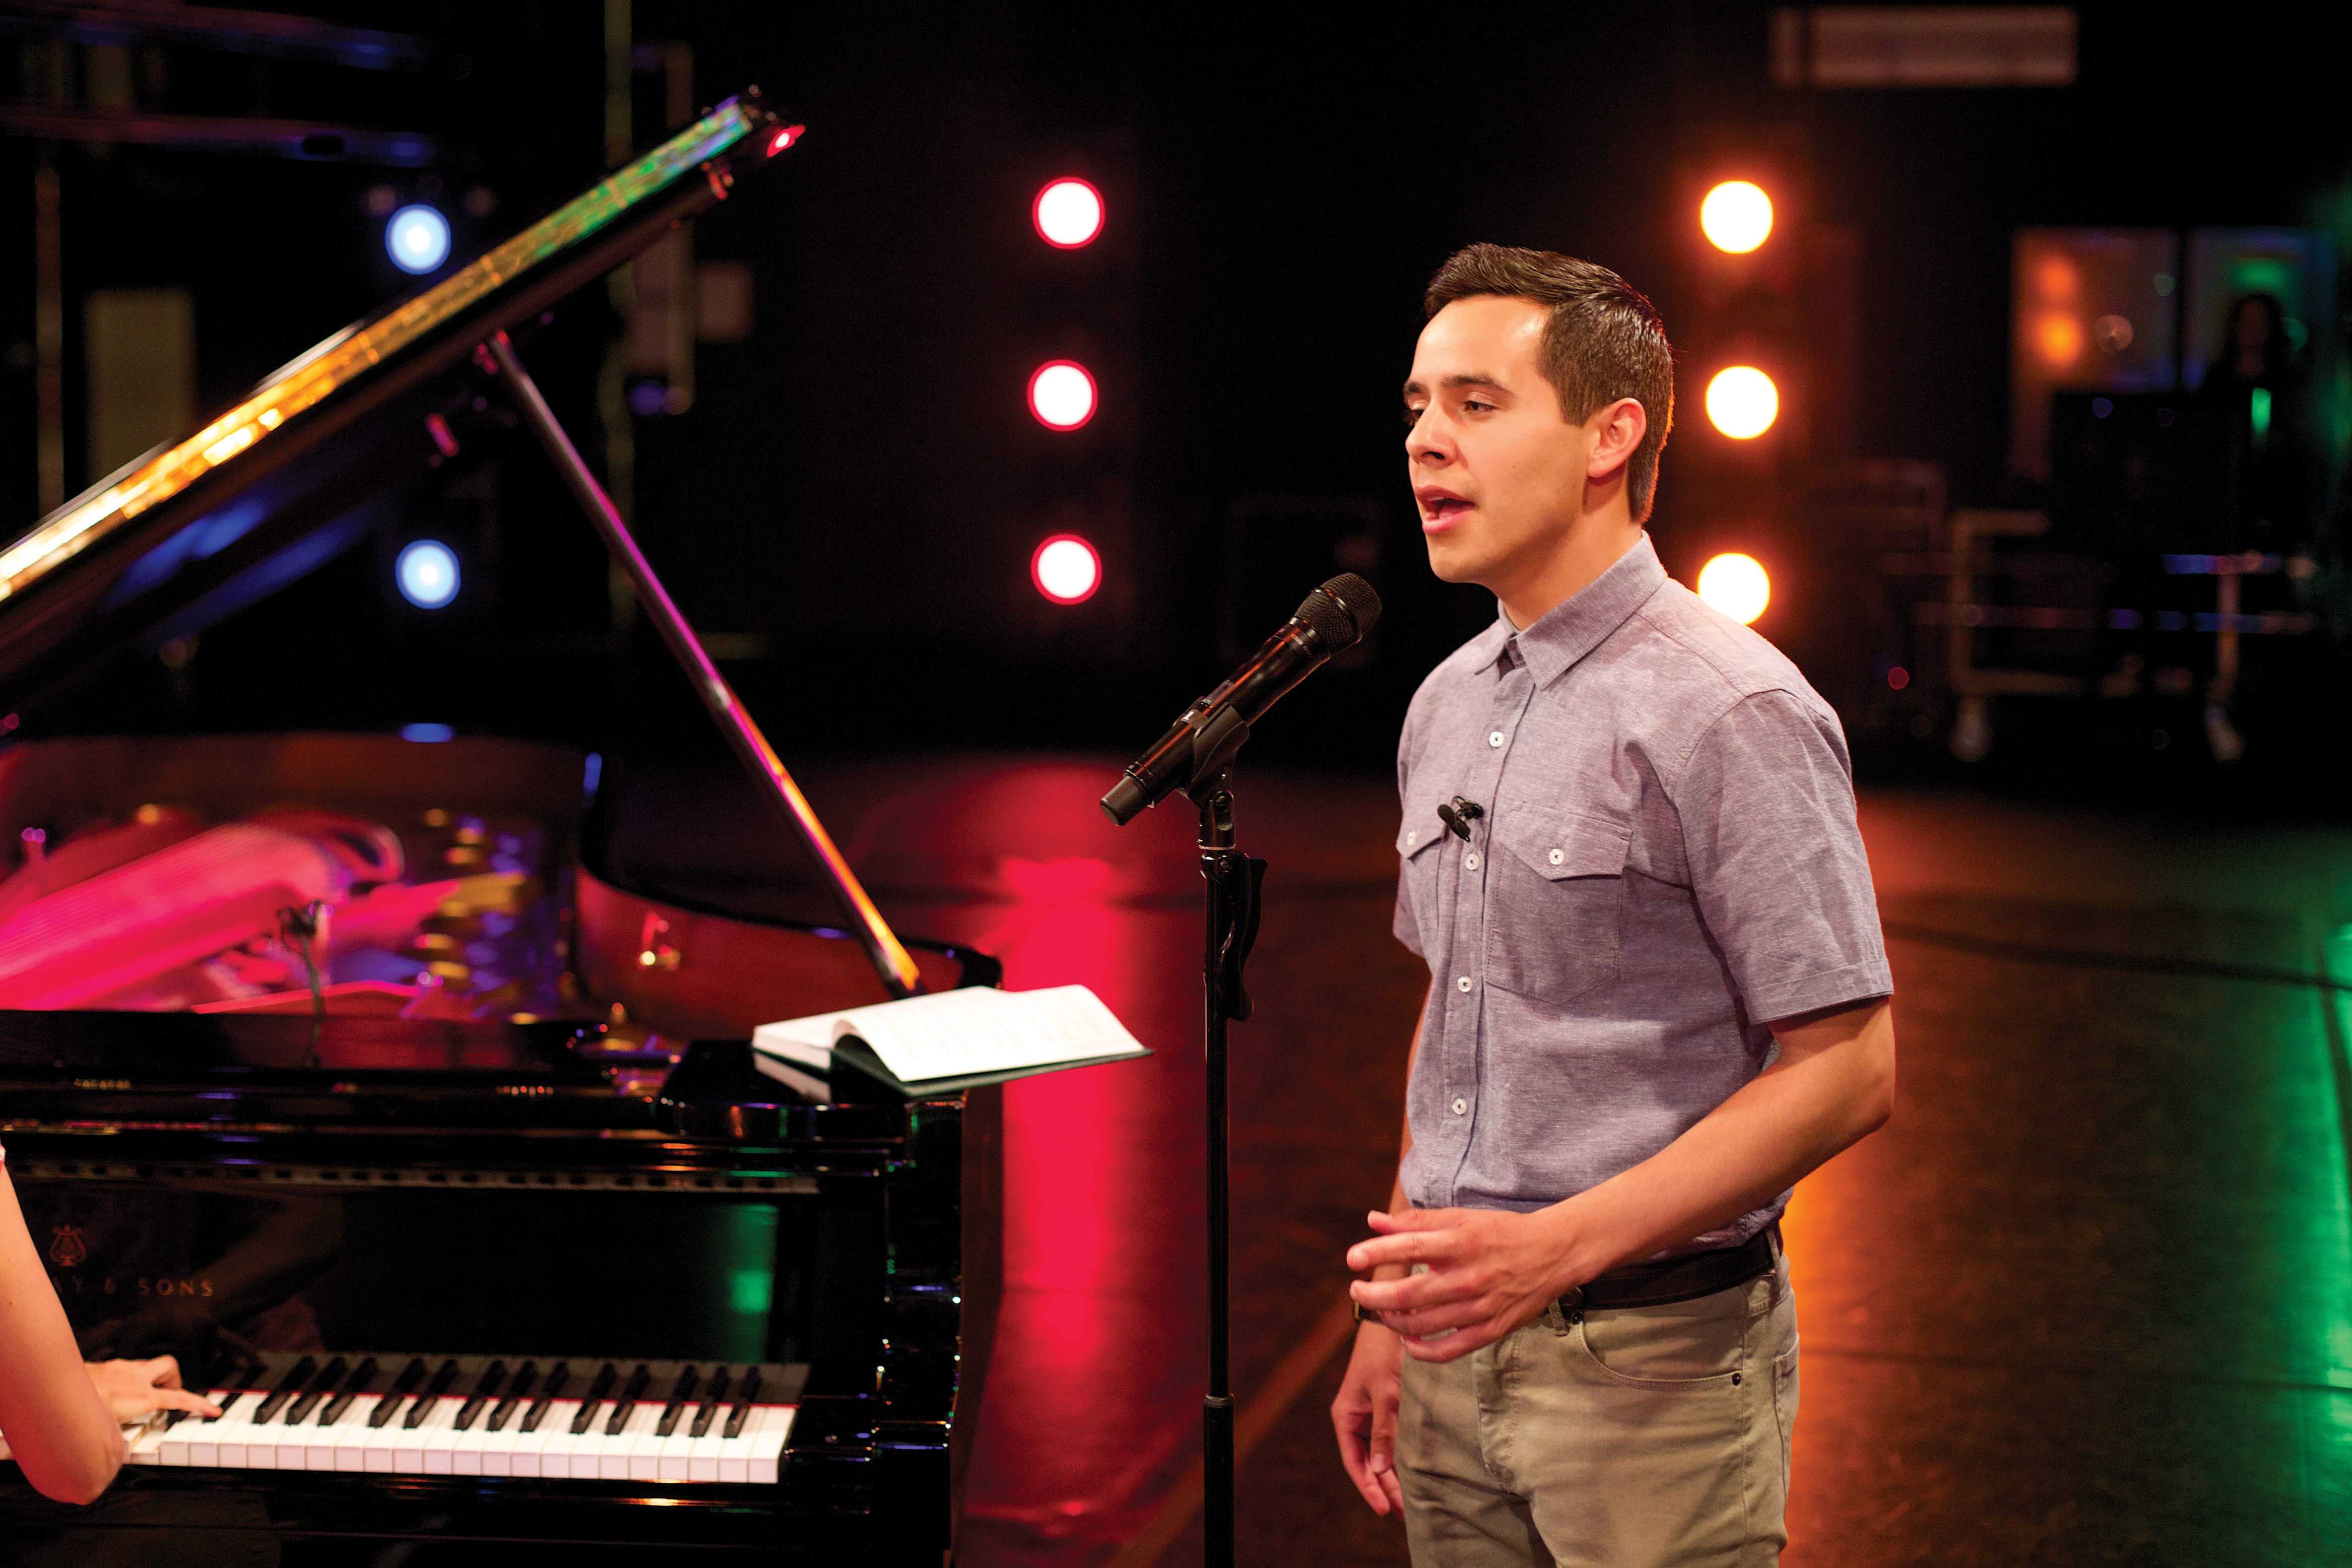 David Archuleta stands on a lighted stage and sings next to a piano.